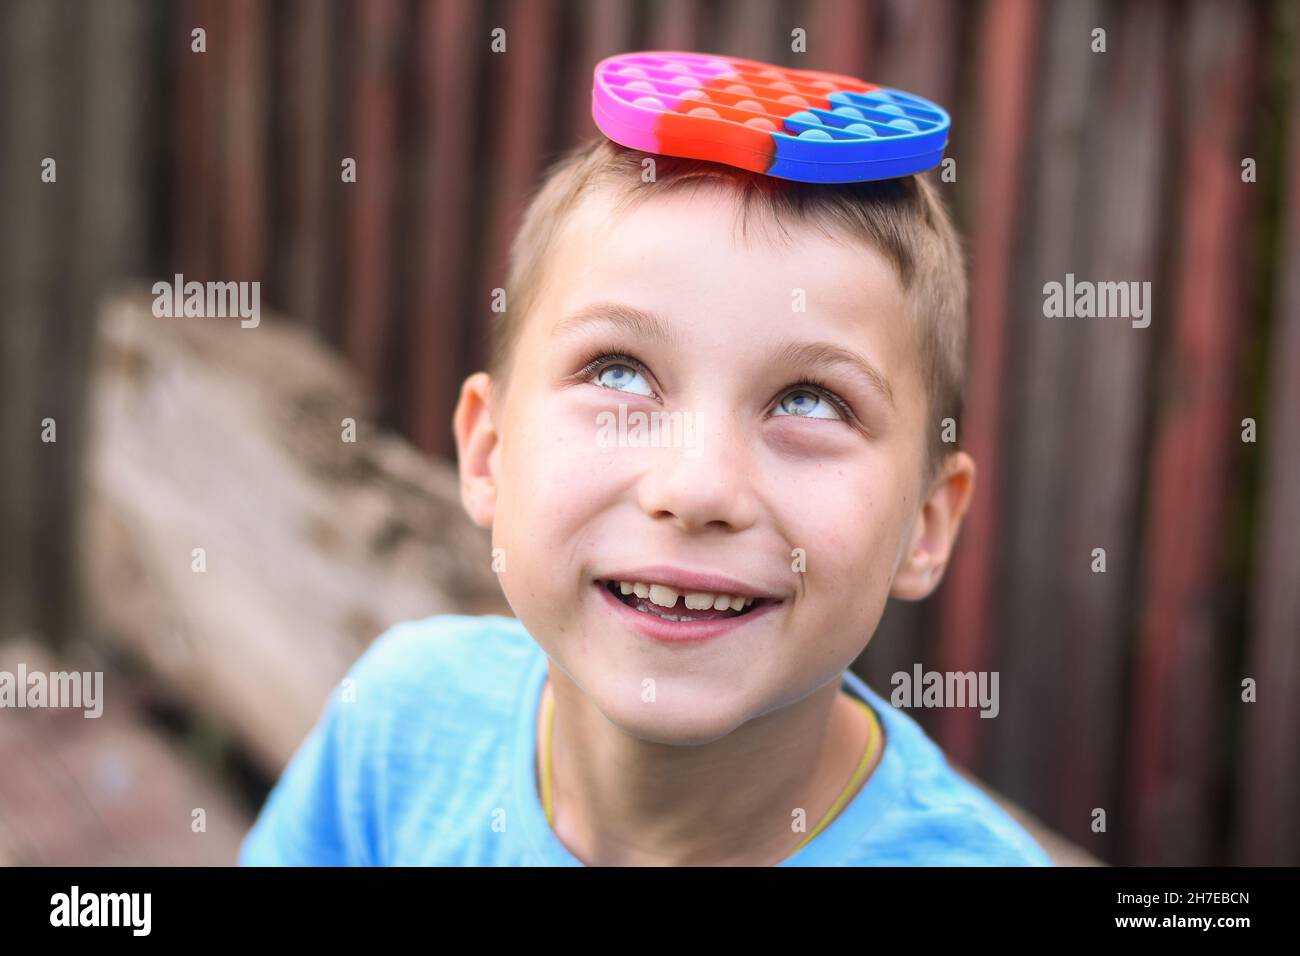 smiling boy with a toy pop it on his head Stock Photo